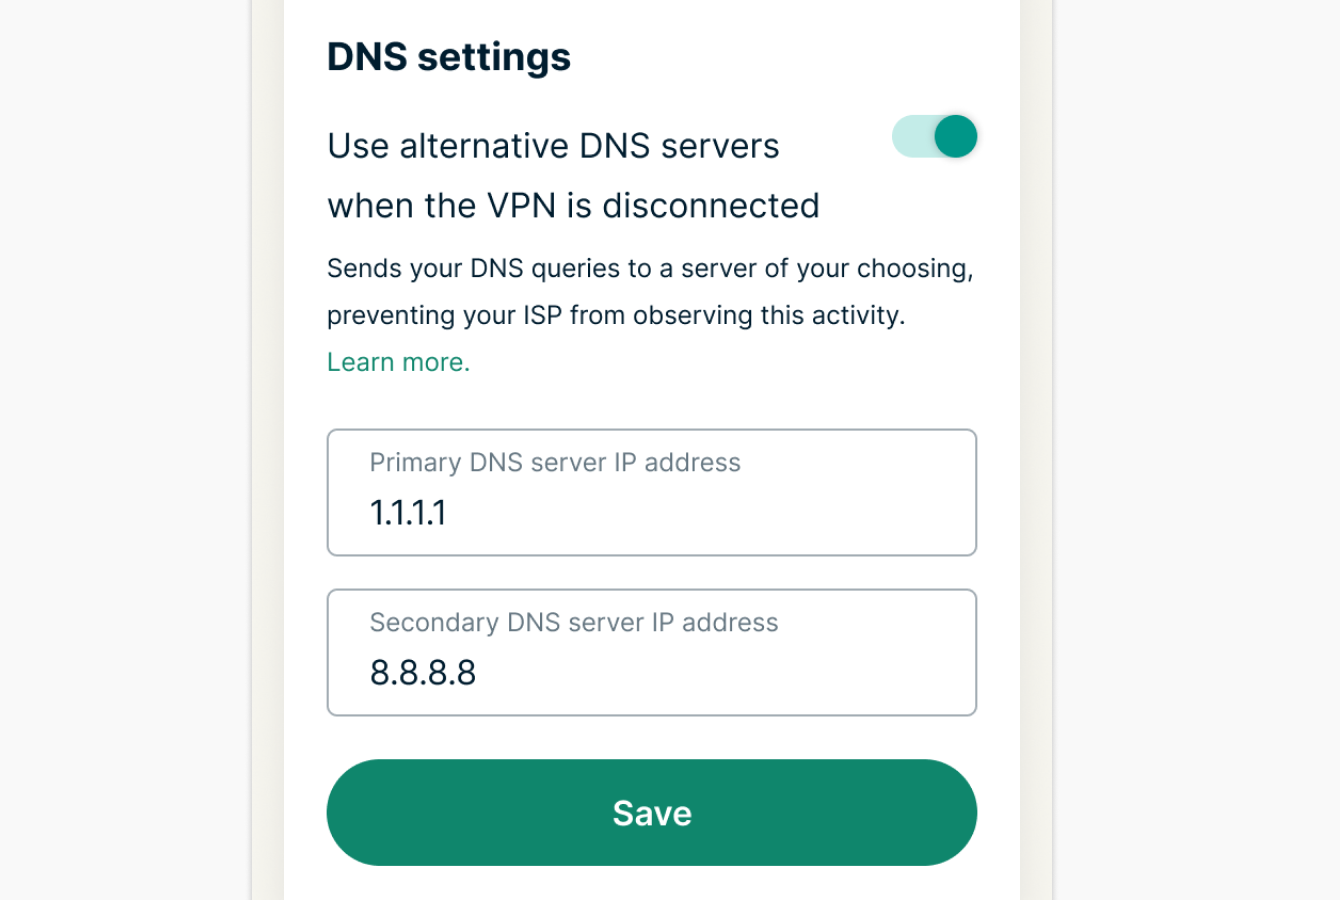 ExpressVPN interface showing DNS settings with alternative DNS servers enabled